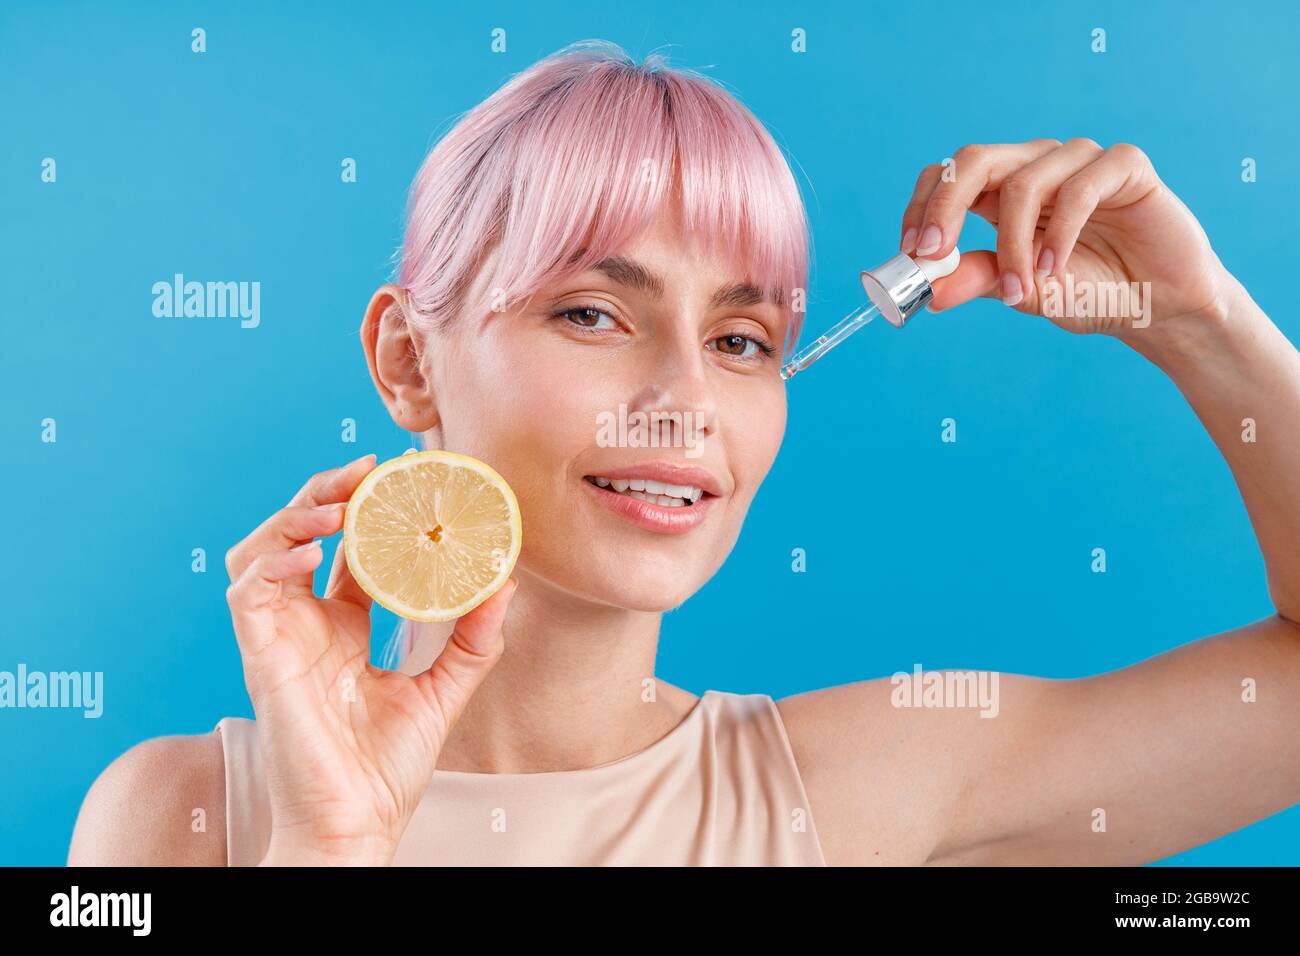 Portrait of attractive woman with perfect skin and pink hair holding half of fresh lemon and a dropper near her face isolated over blue background Stock Photo